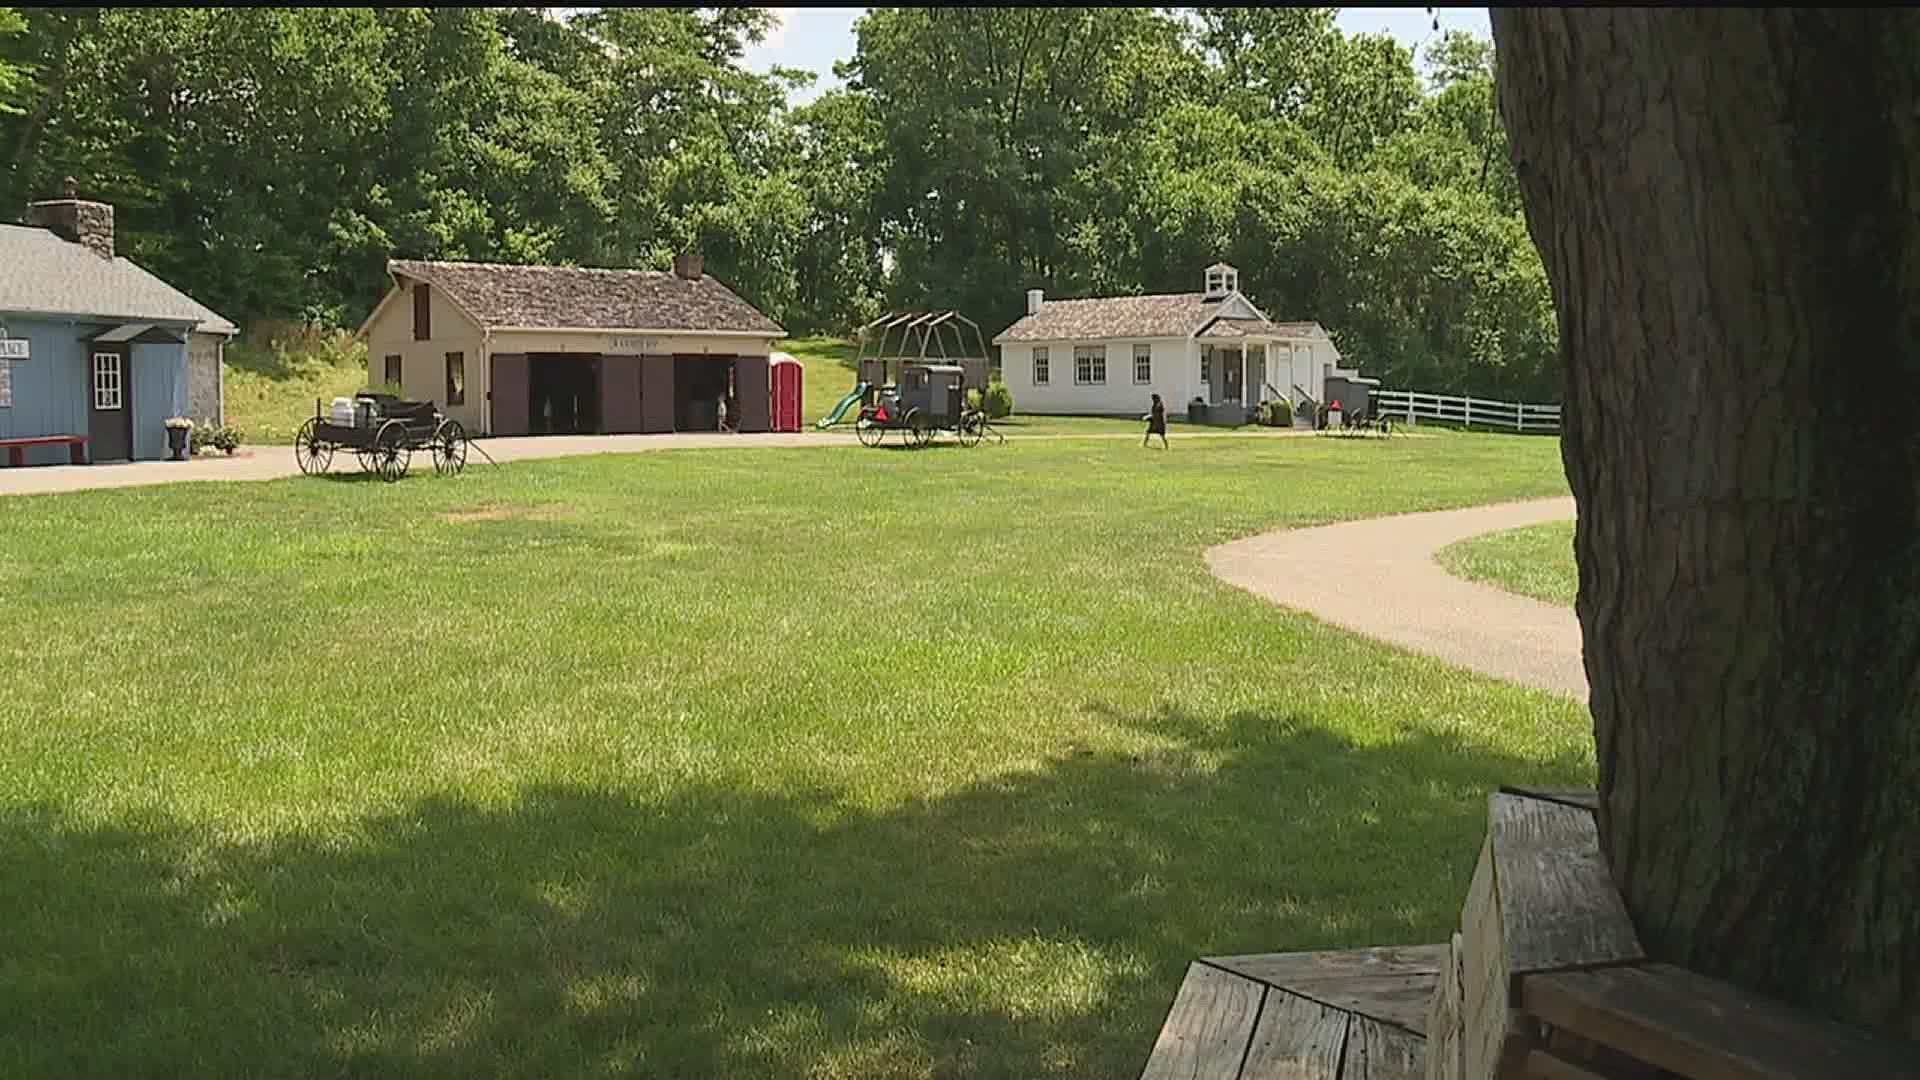 The Amish Village features everything Lancaster County. The popular tourist attraction is back open for business, but business is far from usual.